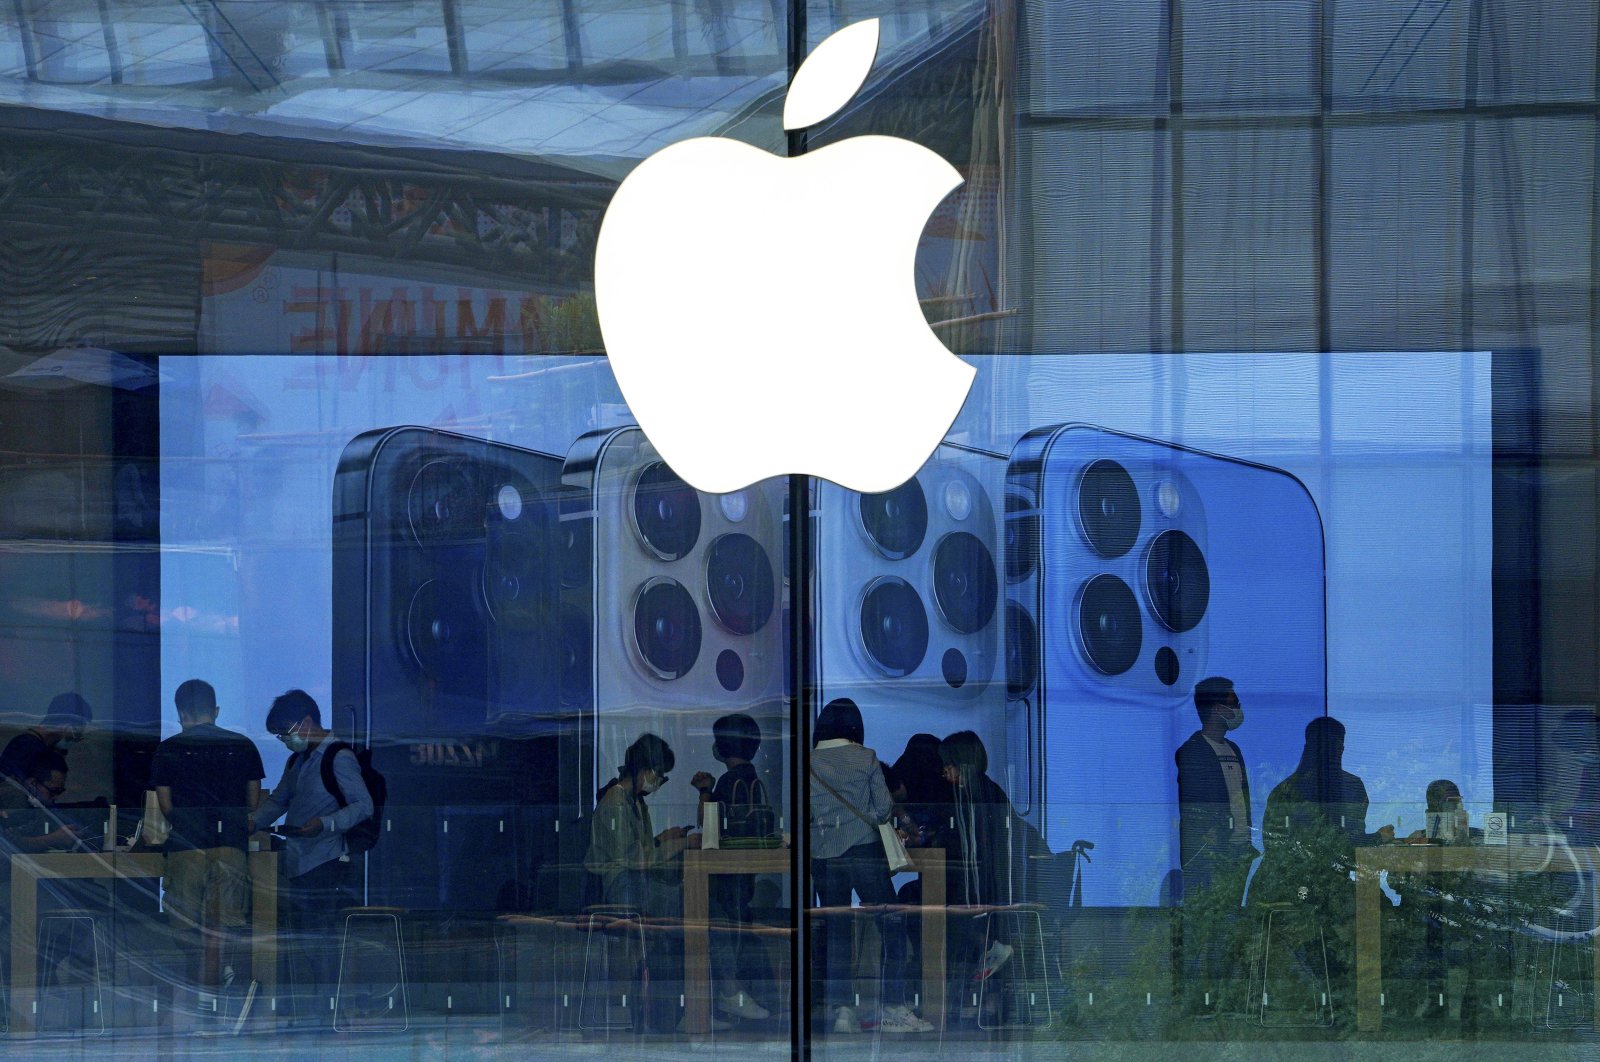 People shop at an Apple Store in Beijing, China, Sept. 28, 2021. (AP Photo)